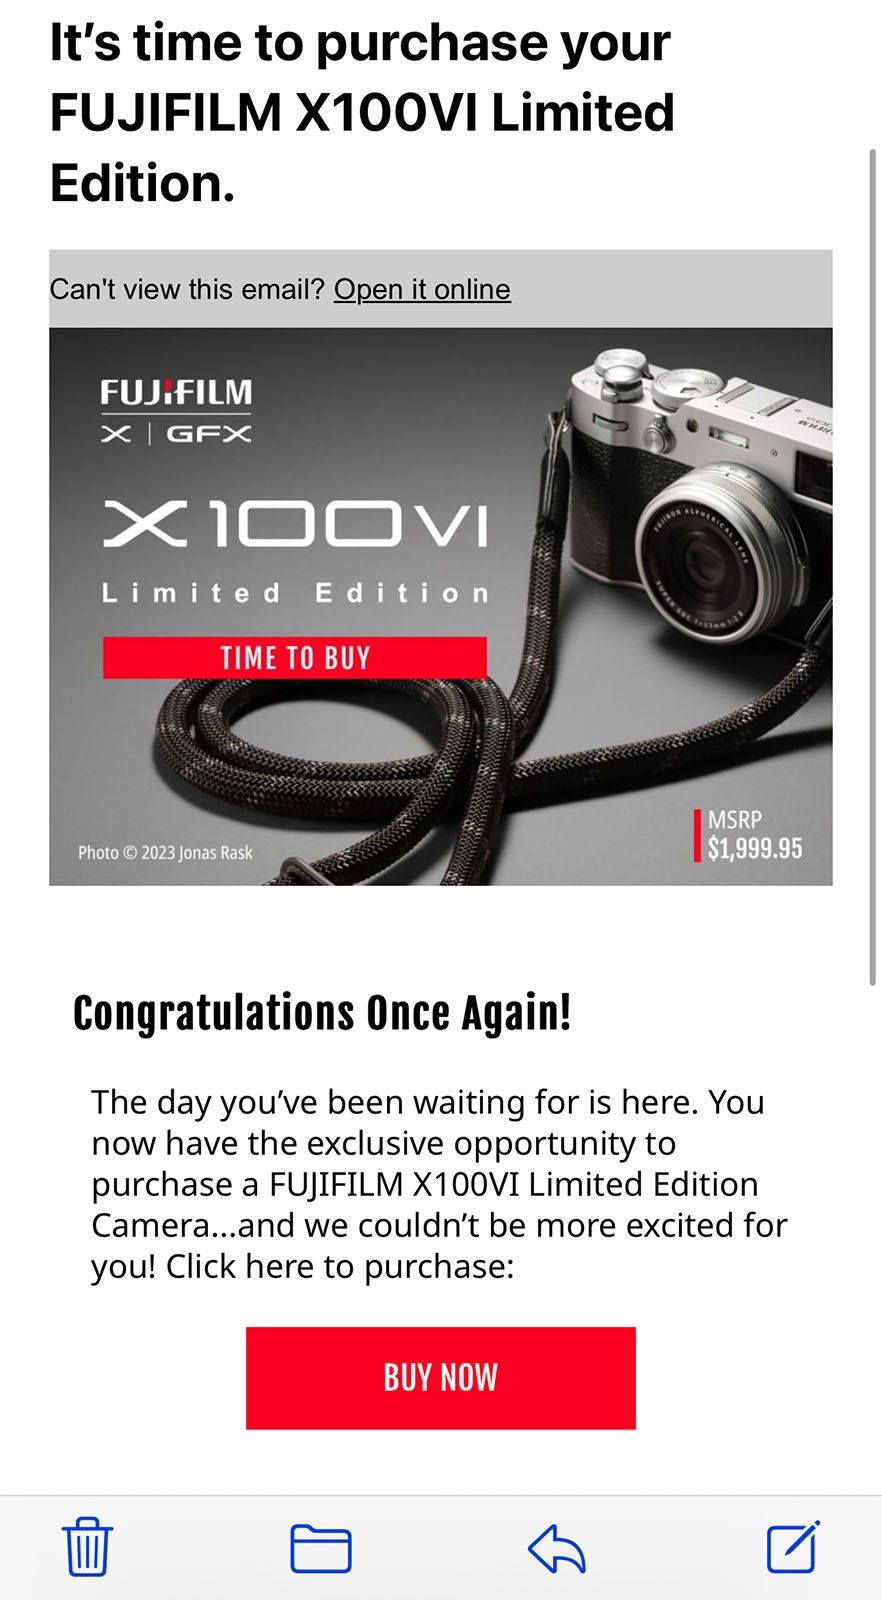 Advertisement for the FUJIFILM X100VI Limited Edition camera. The ad features a photo of the camera with a black strap, a "Time to Buy" button below the photo, and text emphasizing the opportunity to purchase the camera for $1,999.95.